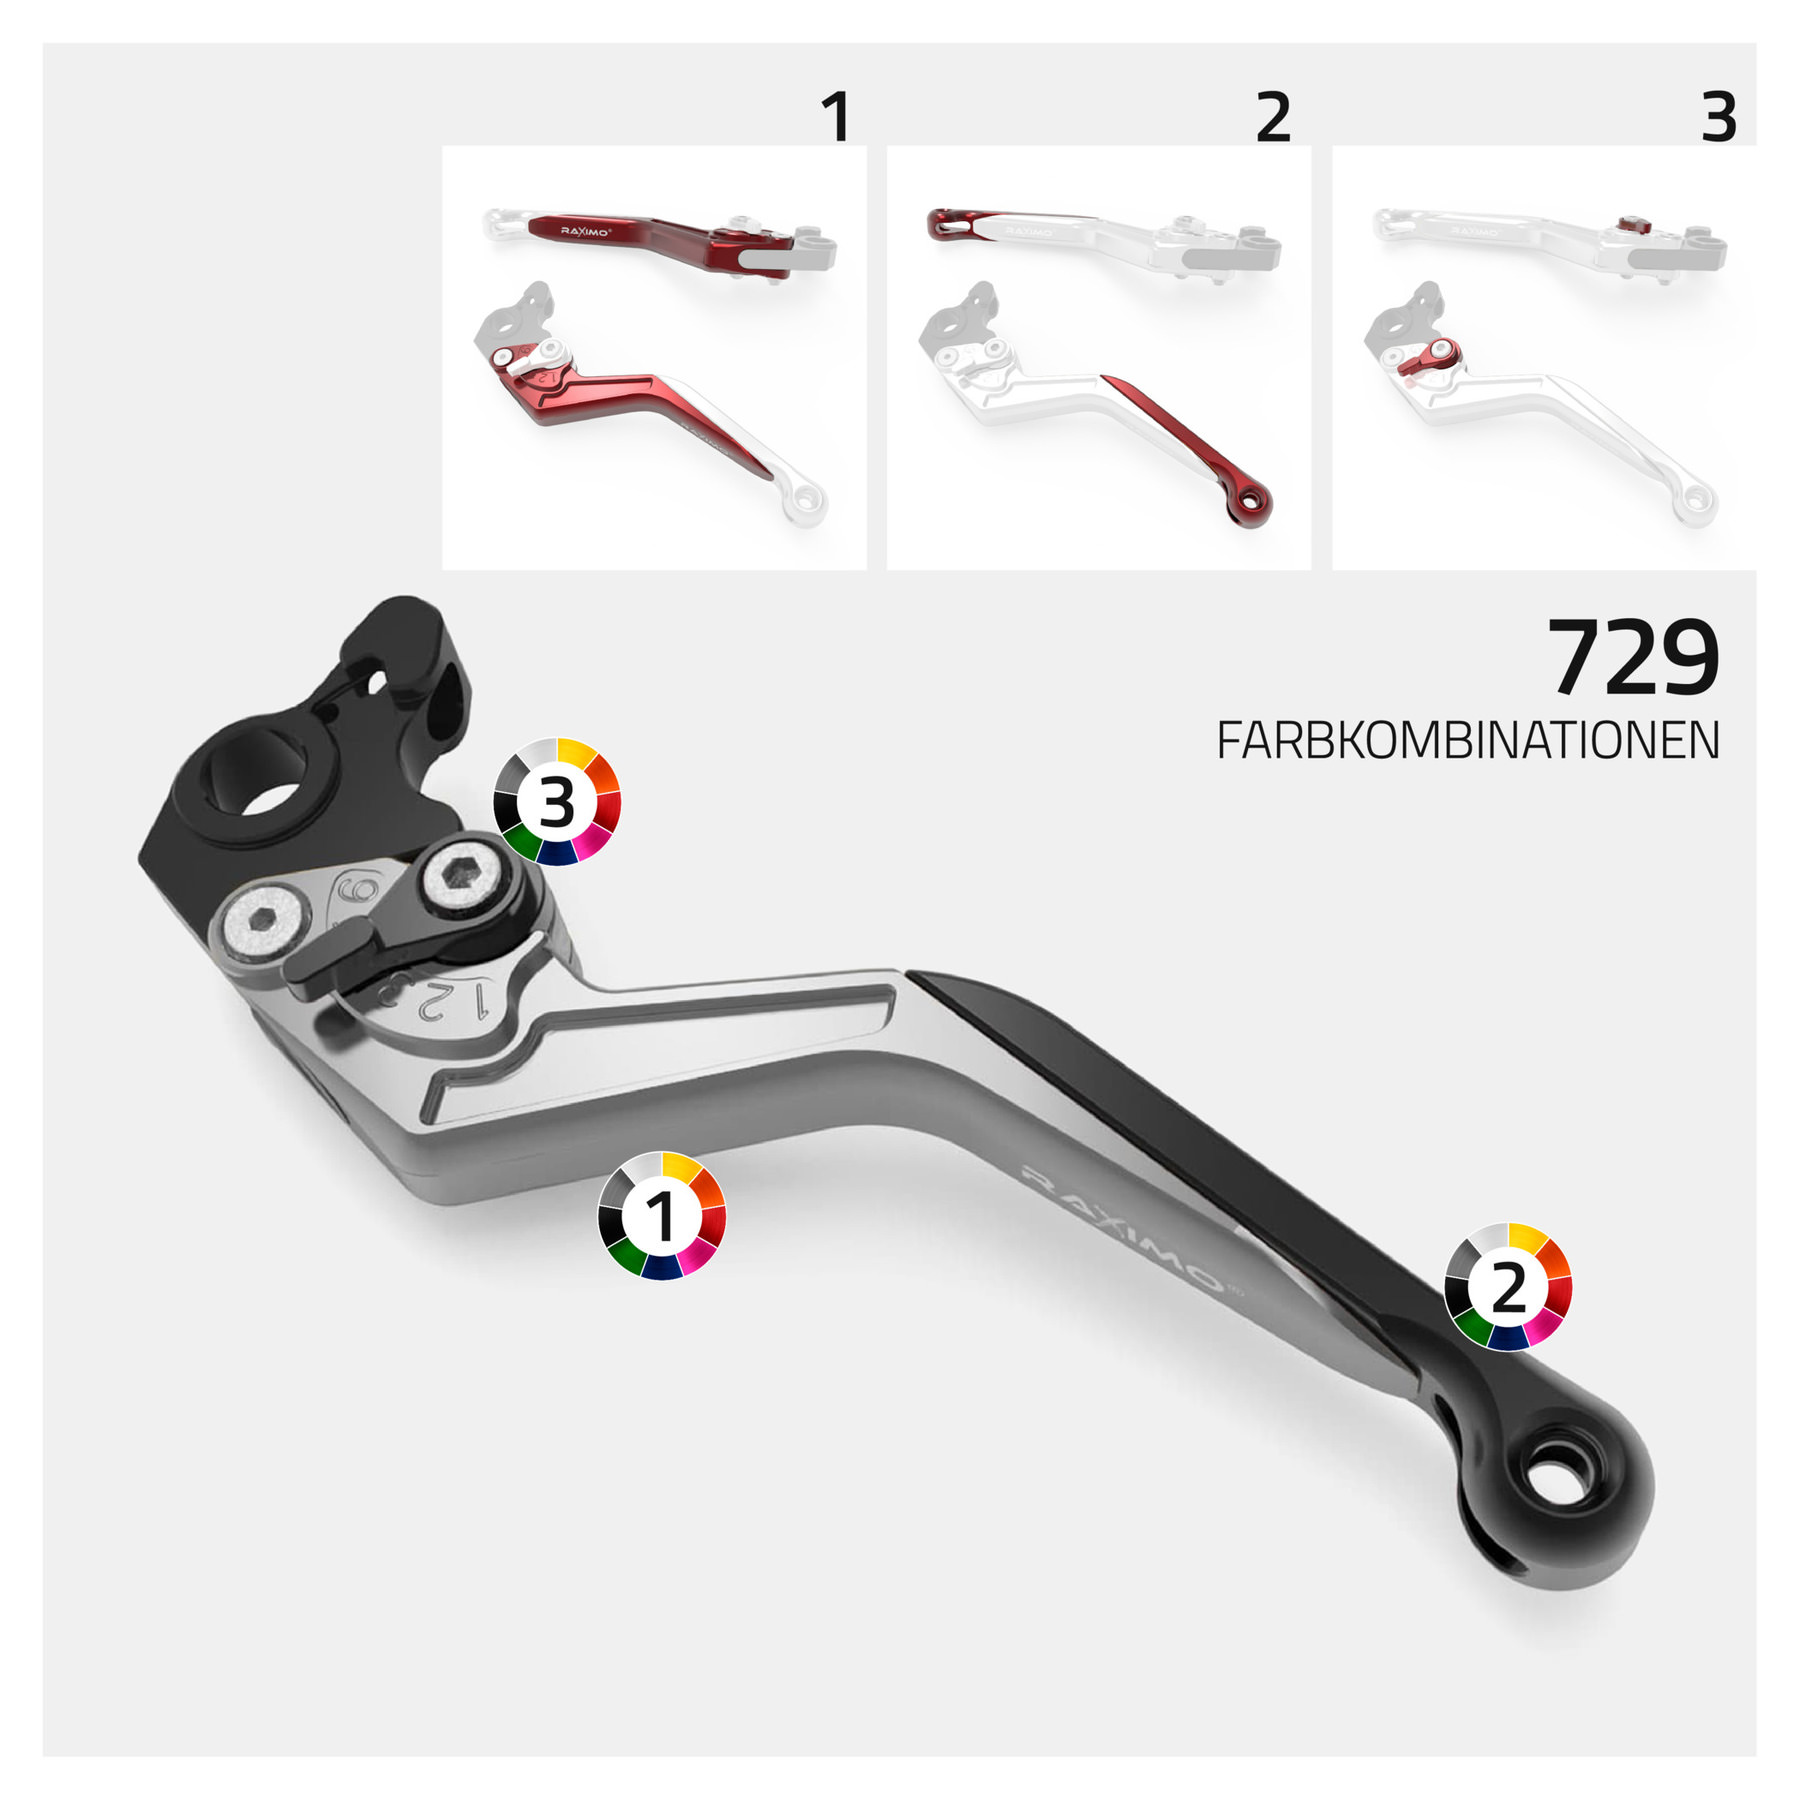 Buy brake / clutch lever sets - ergonomic BCE-ERGONOMICALLY CONFIGURABLE |  Louis motorcycle clothing and technology